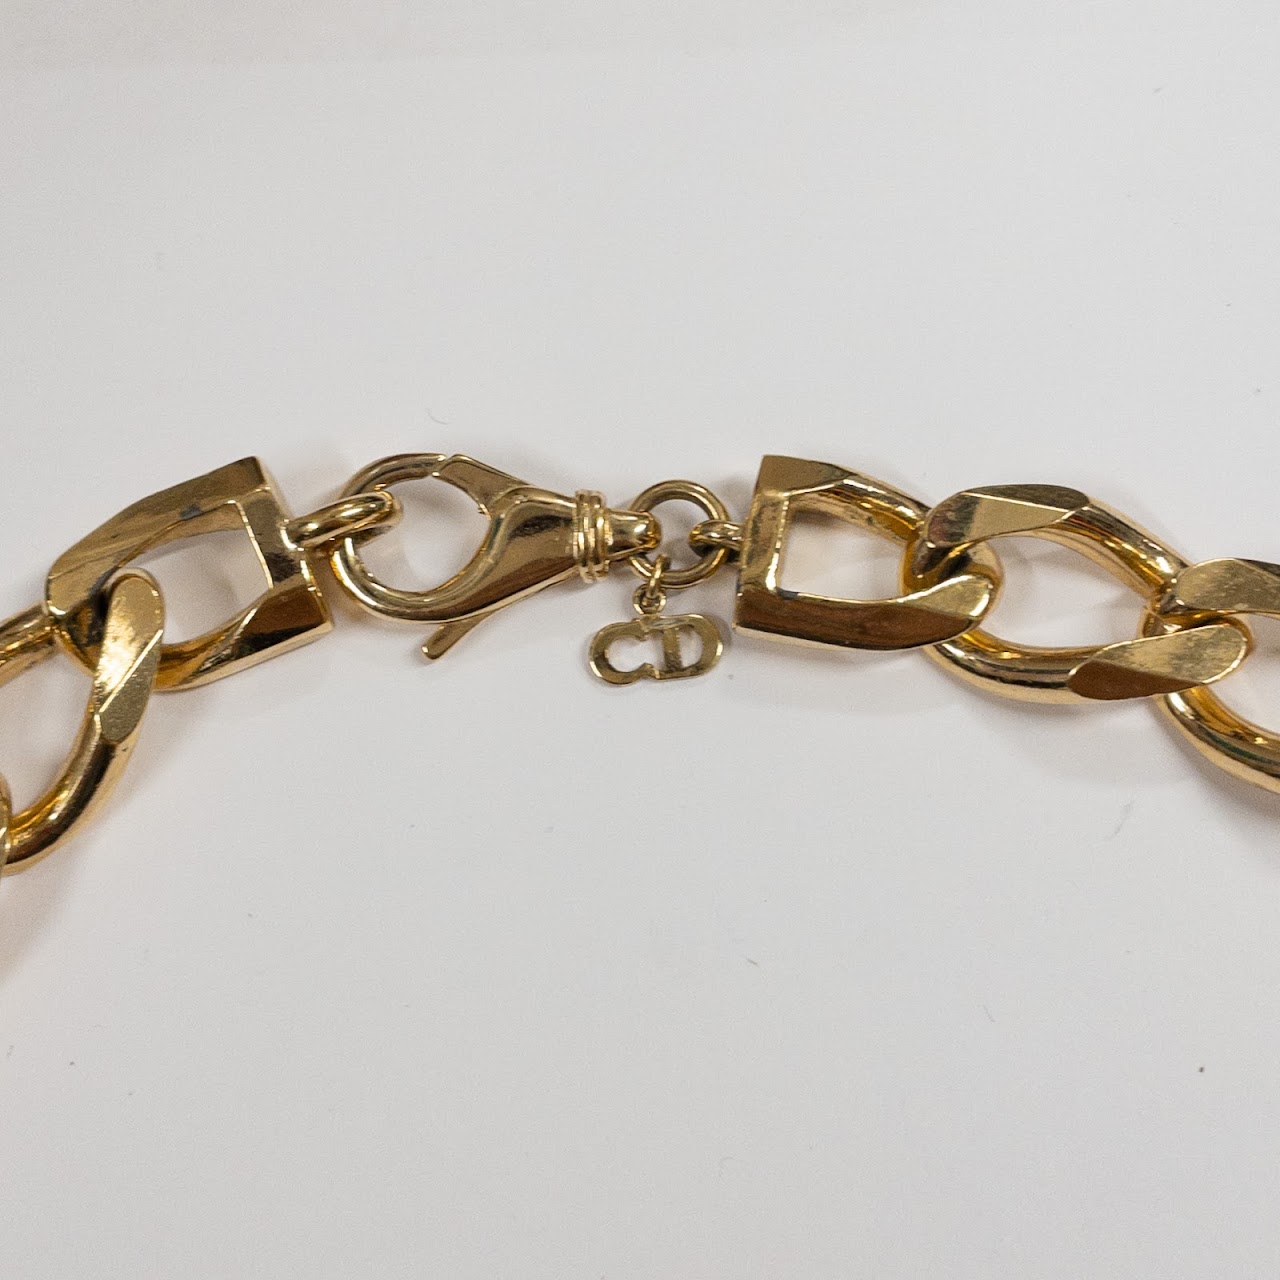 Christian Dior Chain Link Necklace